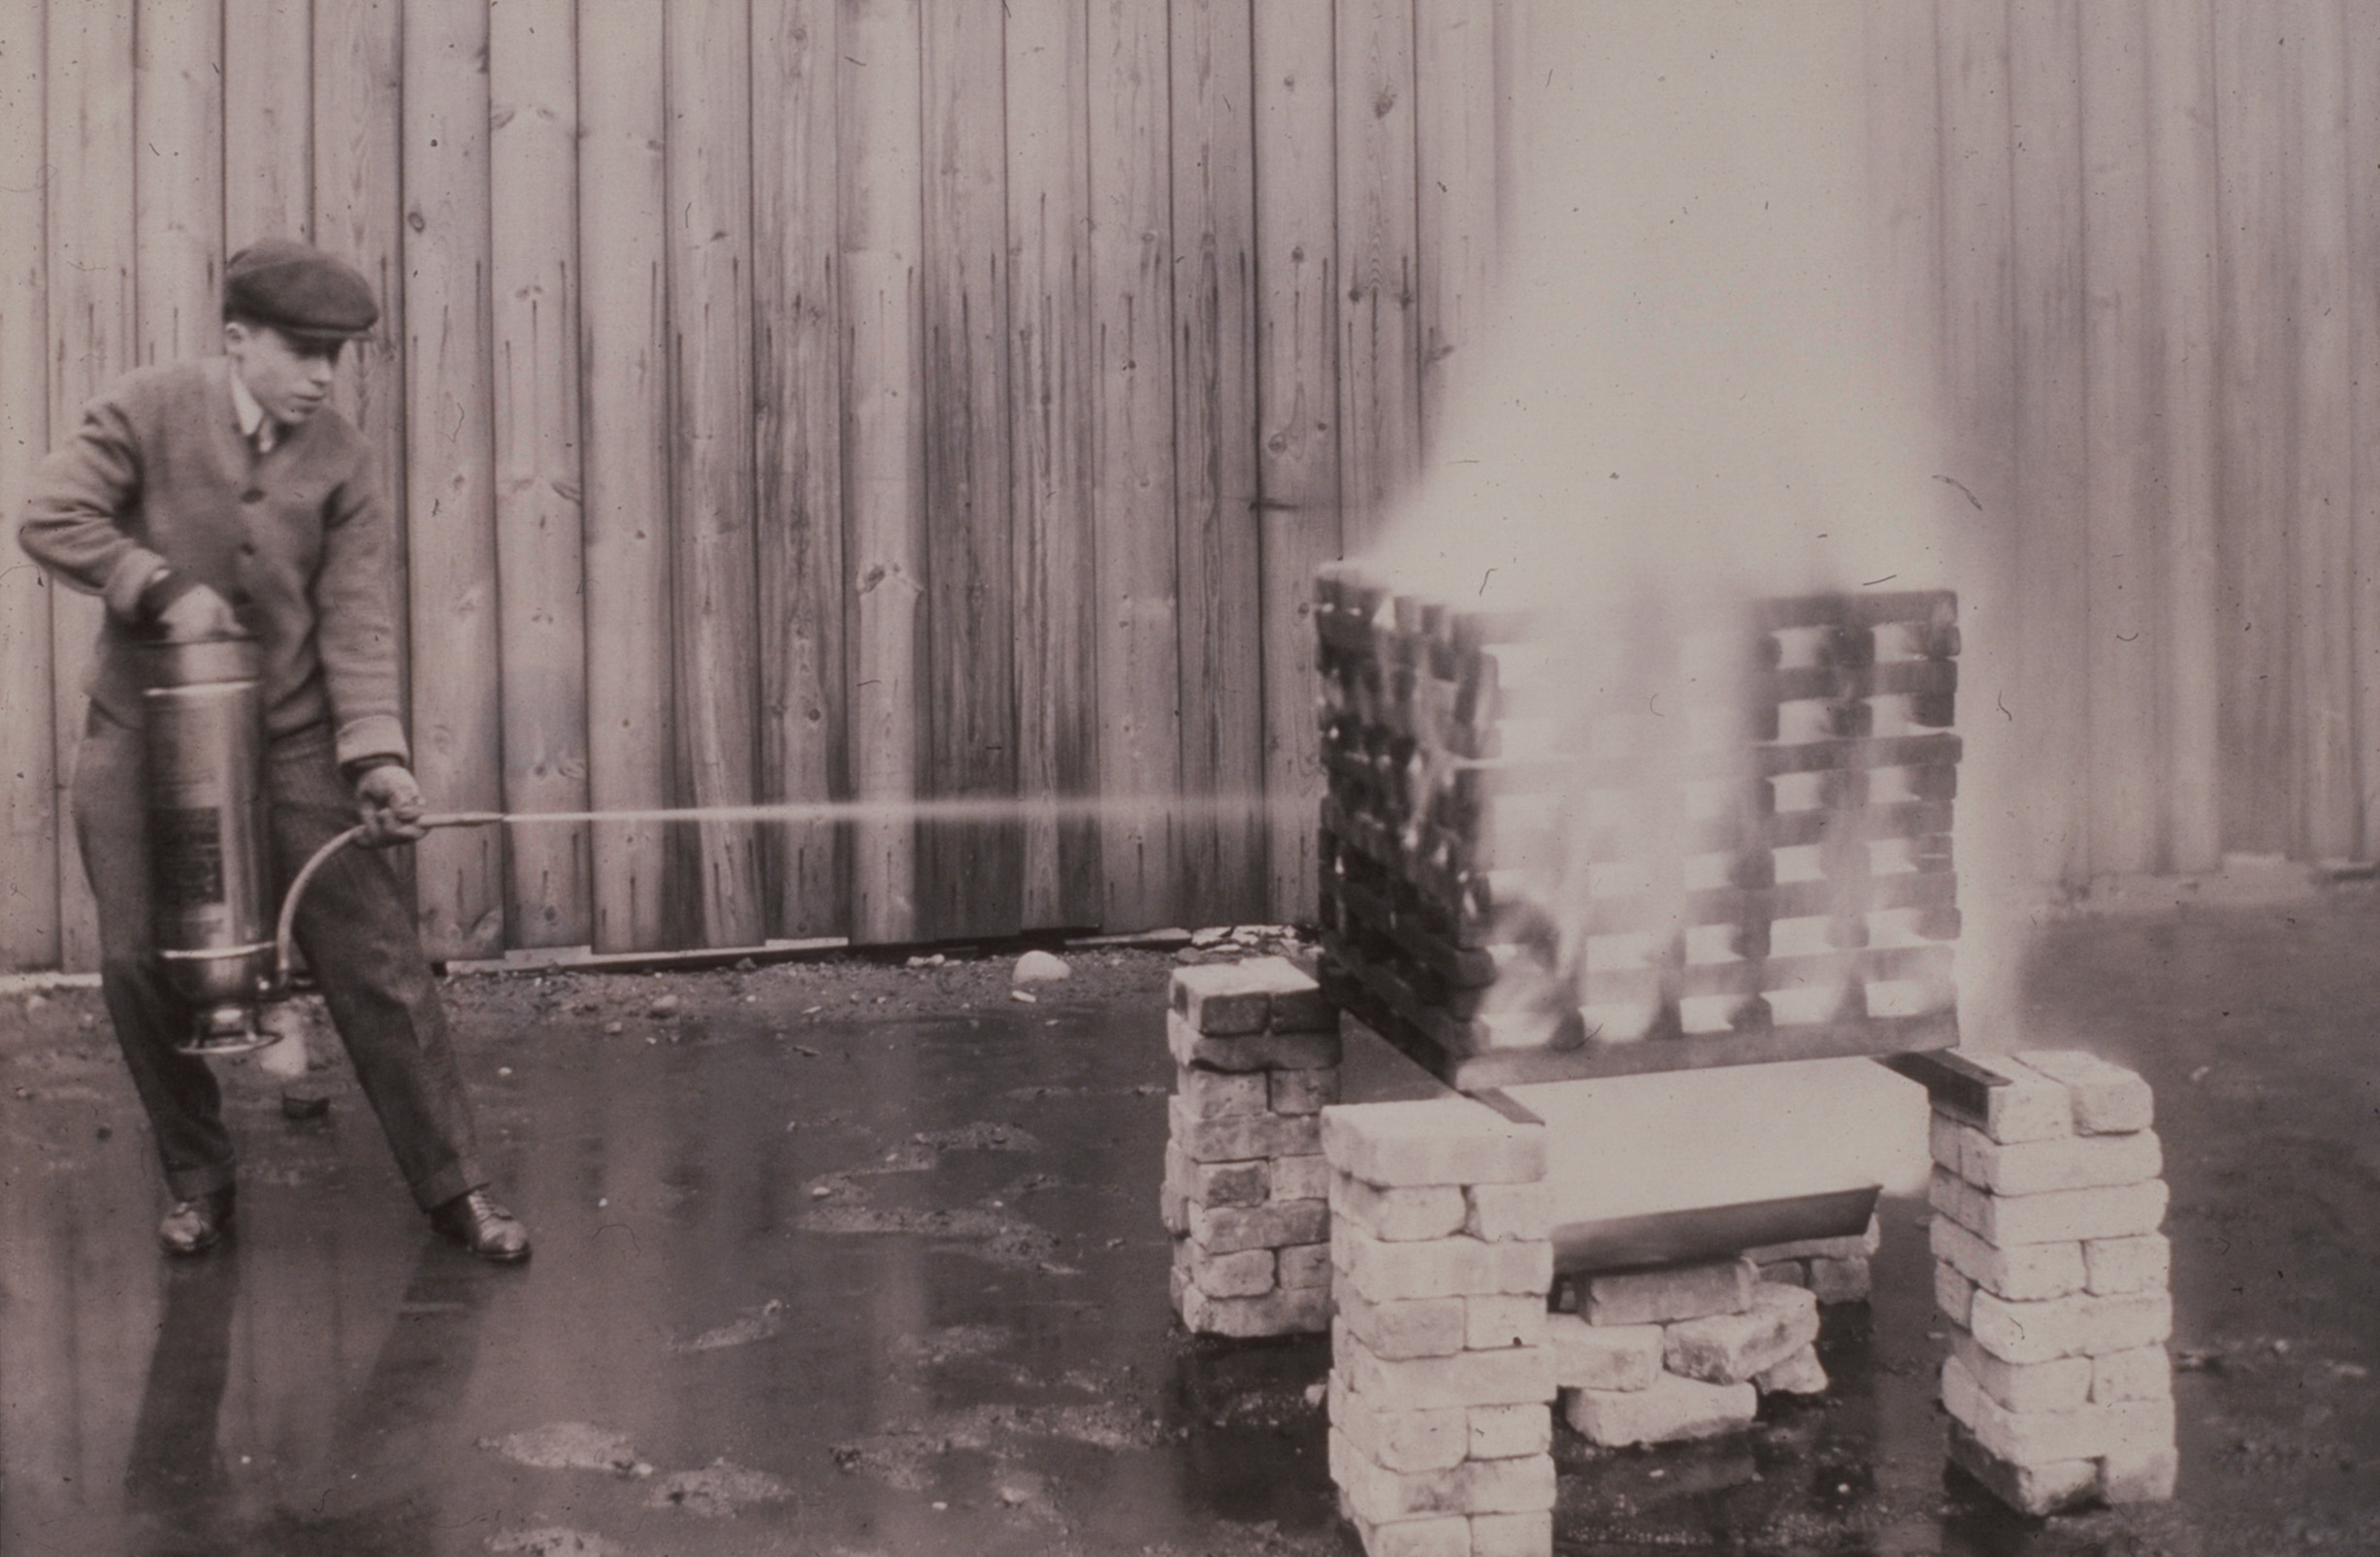 A UL engineer tests a fire extinguisher, ca. 1910.